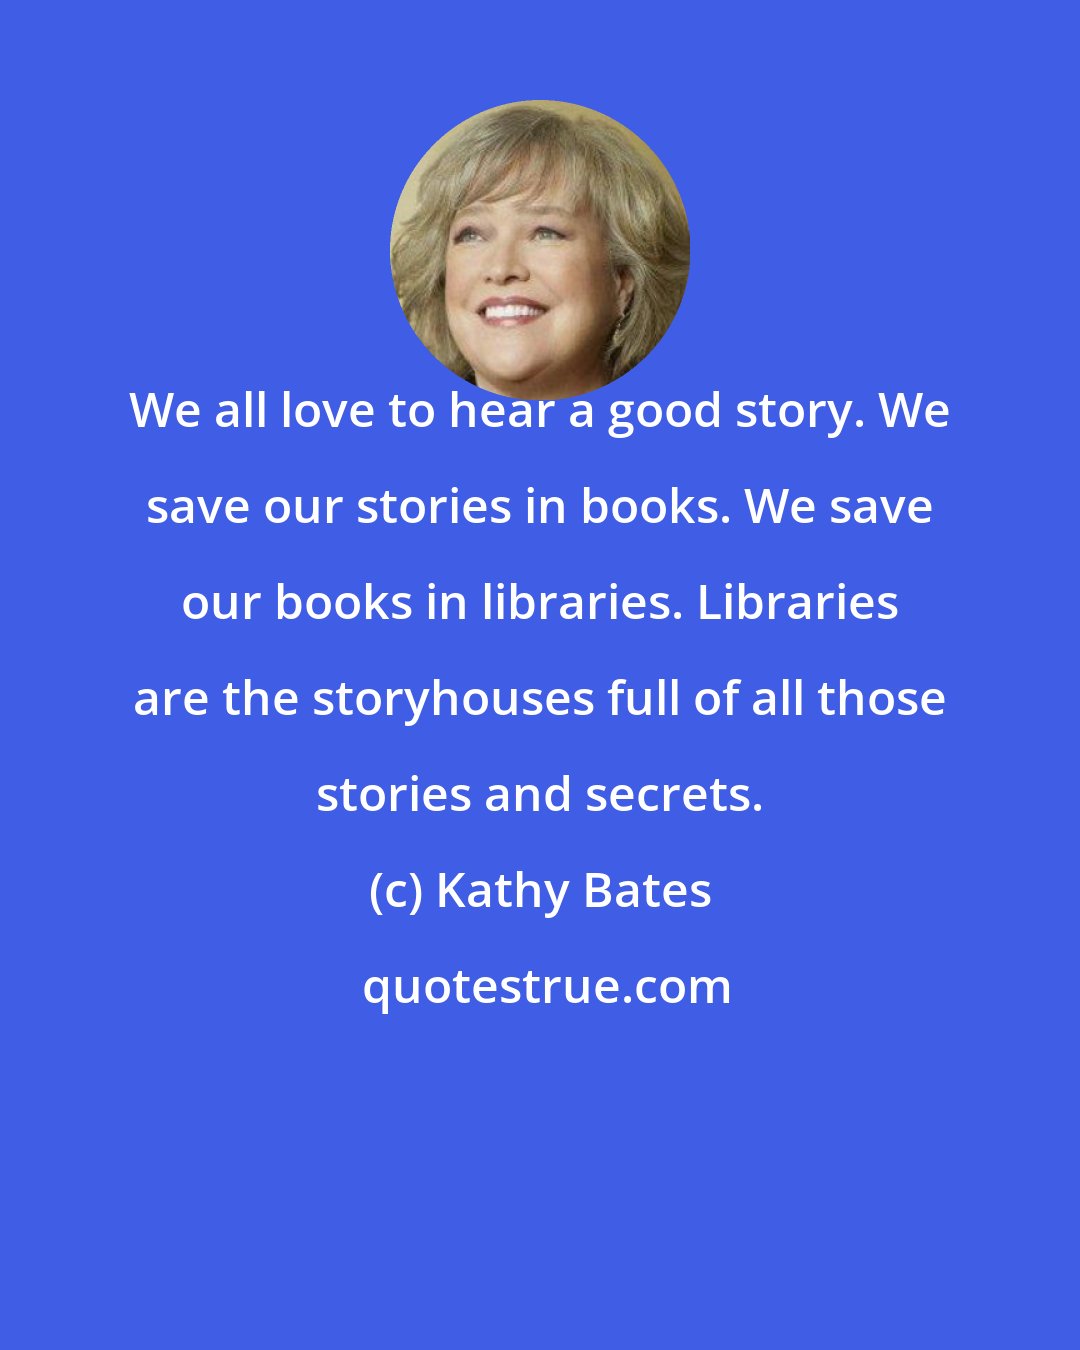 Kathy Bates: We all love to hear a good story. We save our stories in books. We save our books in libraries. Libraries are the storyhouses full of all those stories and secrets.